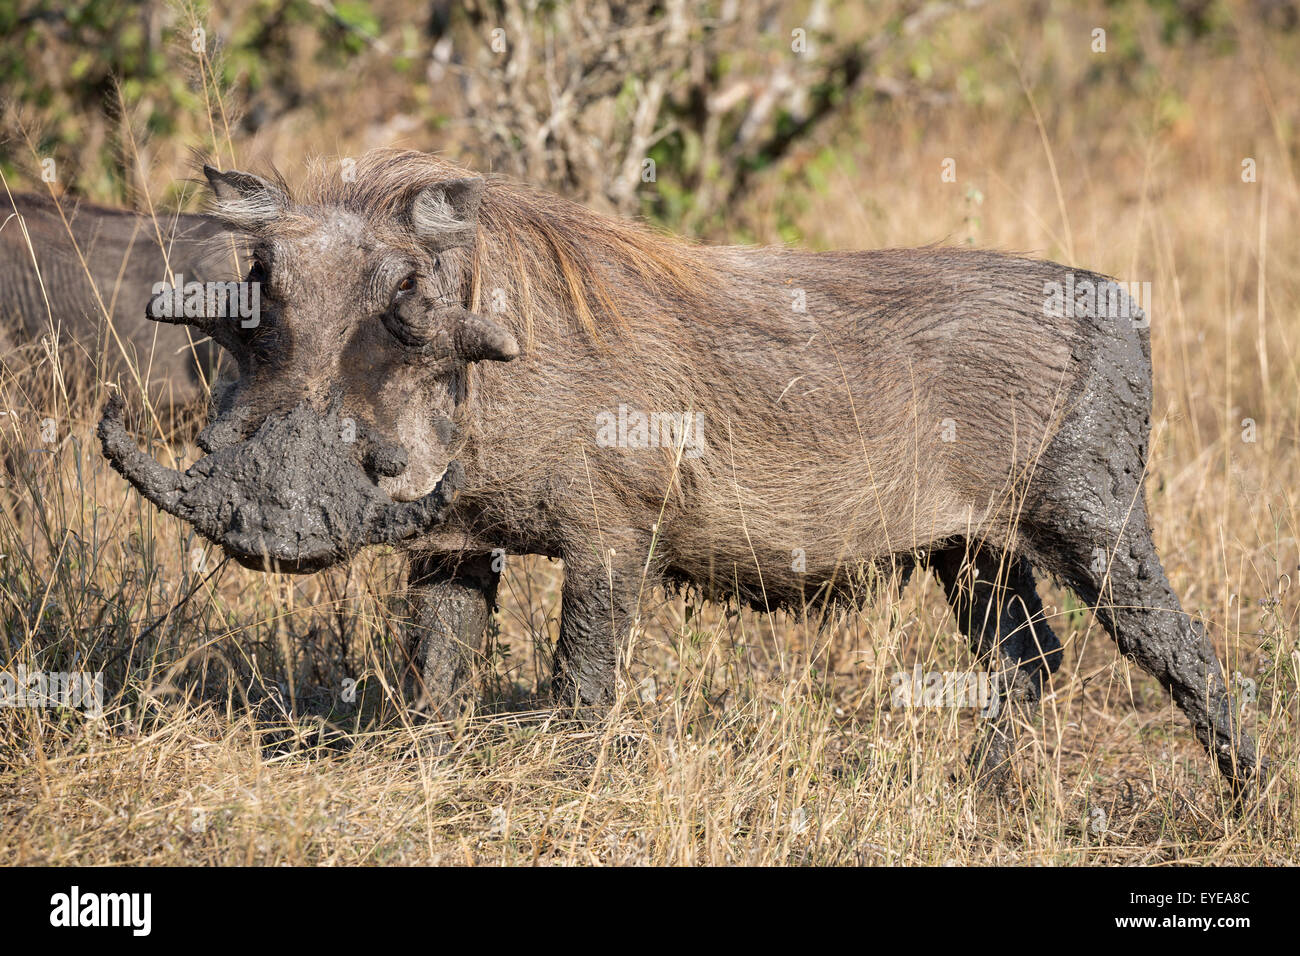 Warthog (Phacochoerus aethiopicus), Kruger National Park, South Africa Stock Photo